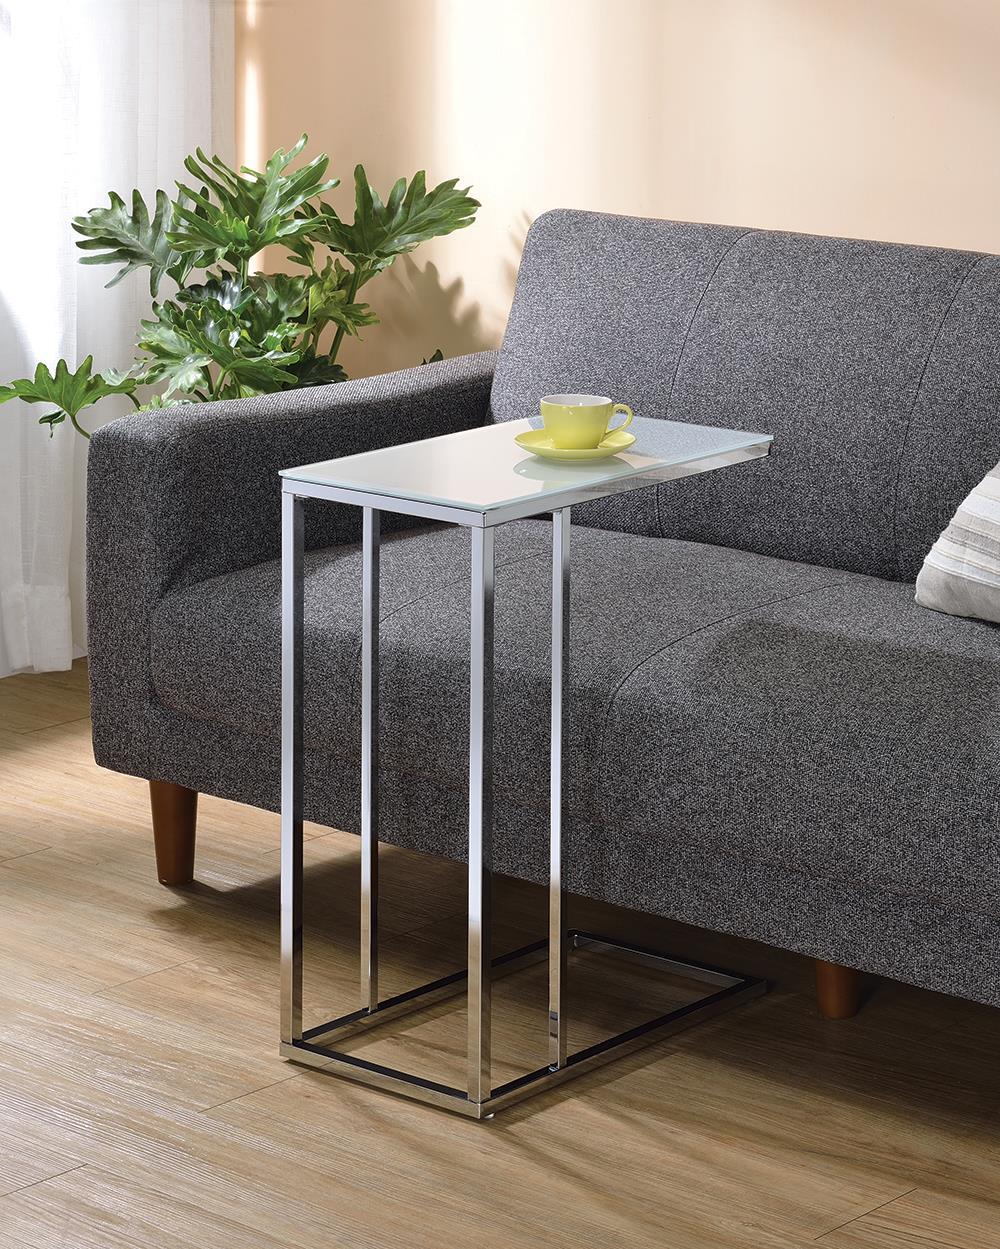 Stella Glass Top Accent Table Chrome and White Stella Glass Top Accent Table Chrome and White Half Price Furniture